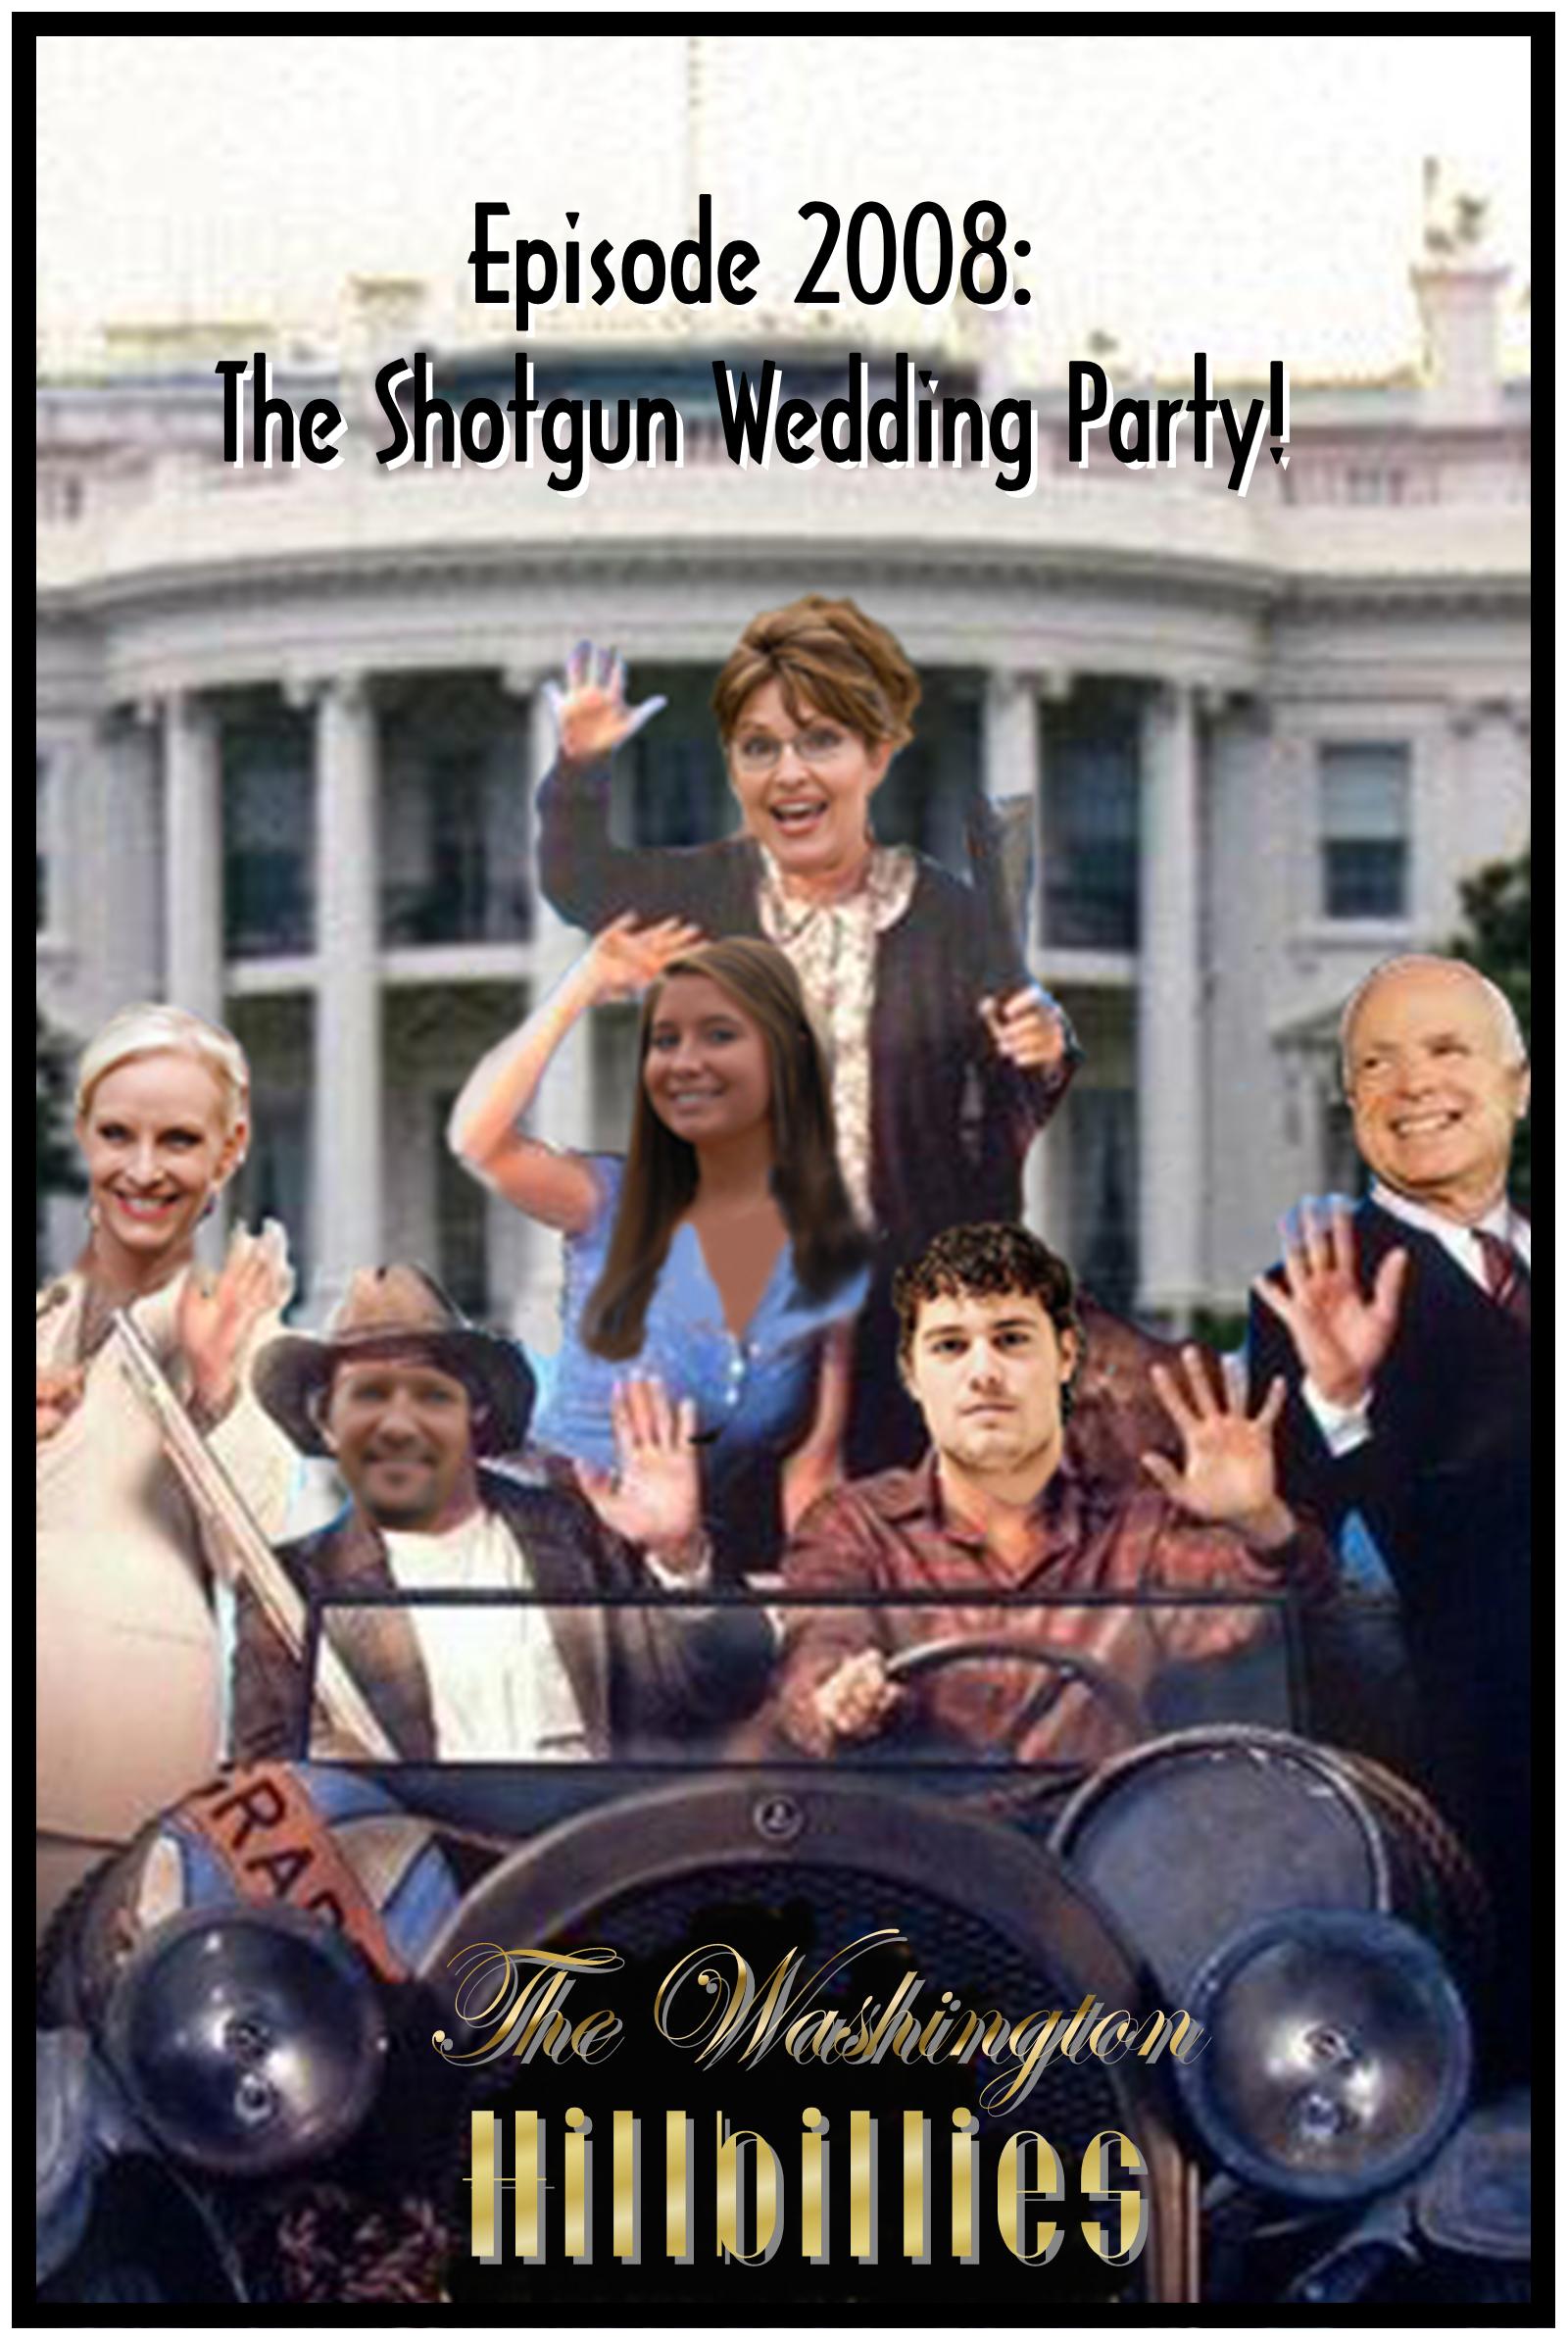 It's your worst nightmare!  The shotgun White House wedding, featuring Sarah and her clan!